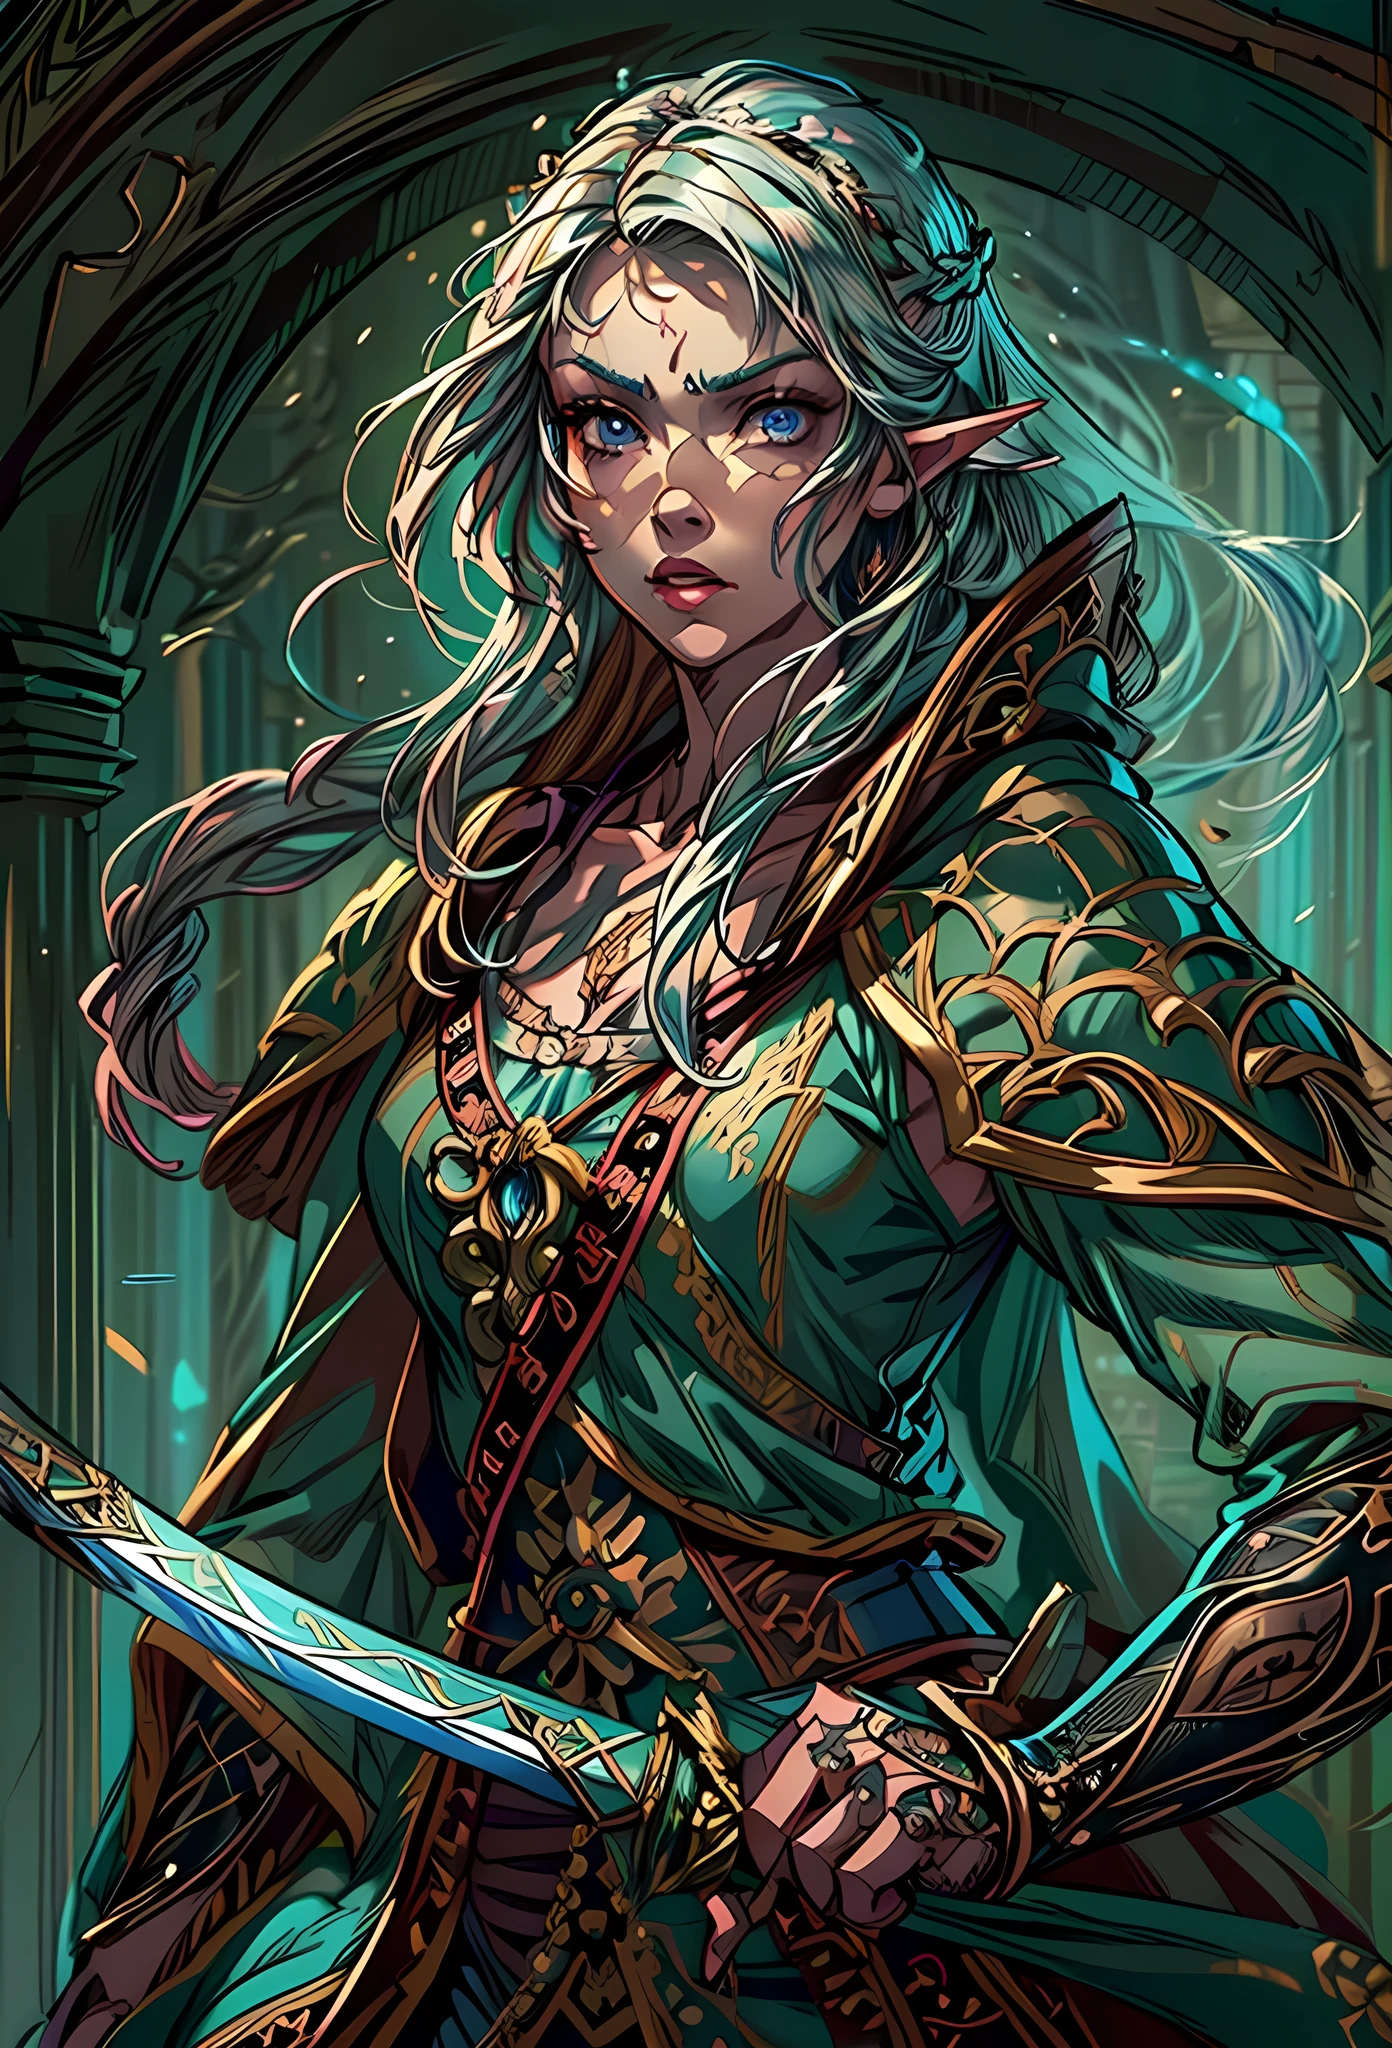 speedpainting a picture of a female elf (intense details, Masterpiece, best quality: 1.5) fantasy swashbuckler, fantasy fencer, armed with a slim sword, shinning sword, metallic shine, colorful clothes, dynamic clothing, an ultra wide shot, full body (intense details, Masterpiece, best quality: 1.5)epic beautiful female elf (intense details, Masterpiece, best quality: 1.5), rich hair, braided hair, small pointed ears, Sword and shield, GLOWING SWORD [colorful magical sigils in the air],[ colorful arcane markings floating] (intricate details, Masterpiece, best quality: 1.6), holding a [sword] (intricate details, Masterpiece, best quality: 1.6) holding a [sword glowing in red light] fantasy urban street (intense details, Masterpiece, best quality: 1.5),  purple cloak, long cloak (intense details, Masterpiece, best quality: 1.5), sense of daring, sense of adventure,  high details, best quality, 8k, [ultra detailed], masterpiece, best quality, (extremely detailed), dynamic angle, ultra wide shot, photorealistic, RAW, fantasy art, dnd art, fantasy art, realistic art, fantasysword sword, 